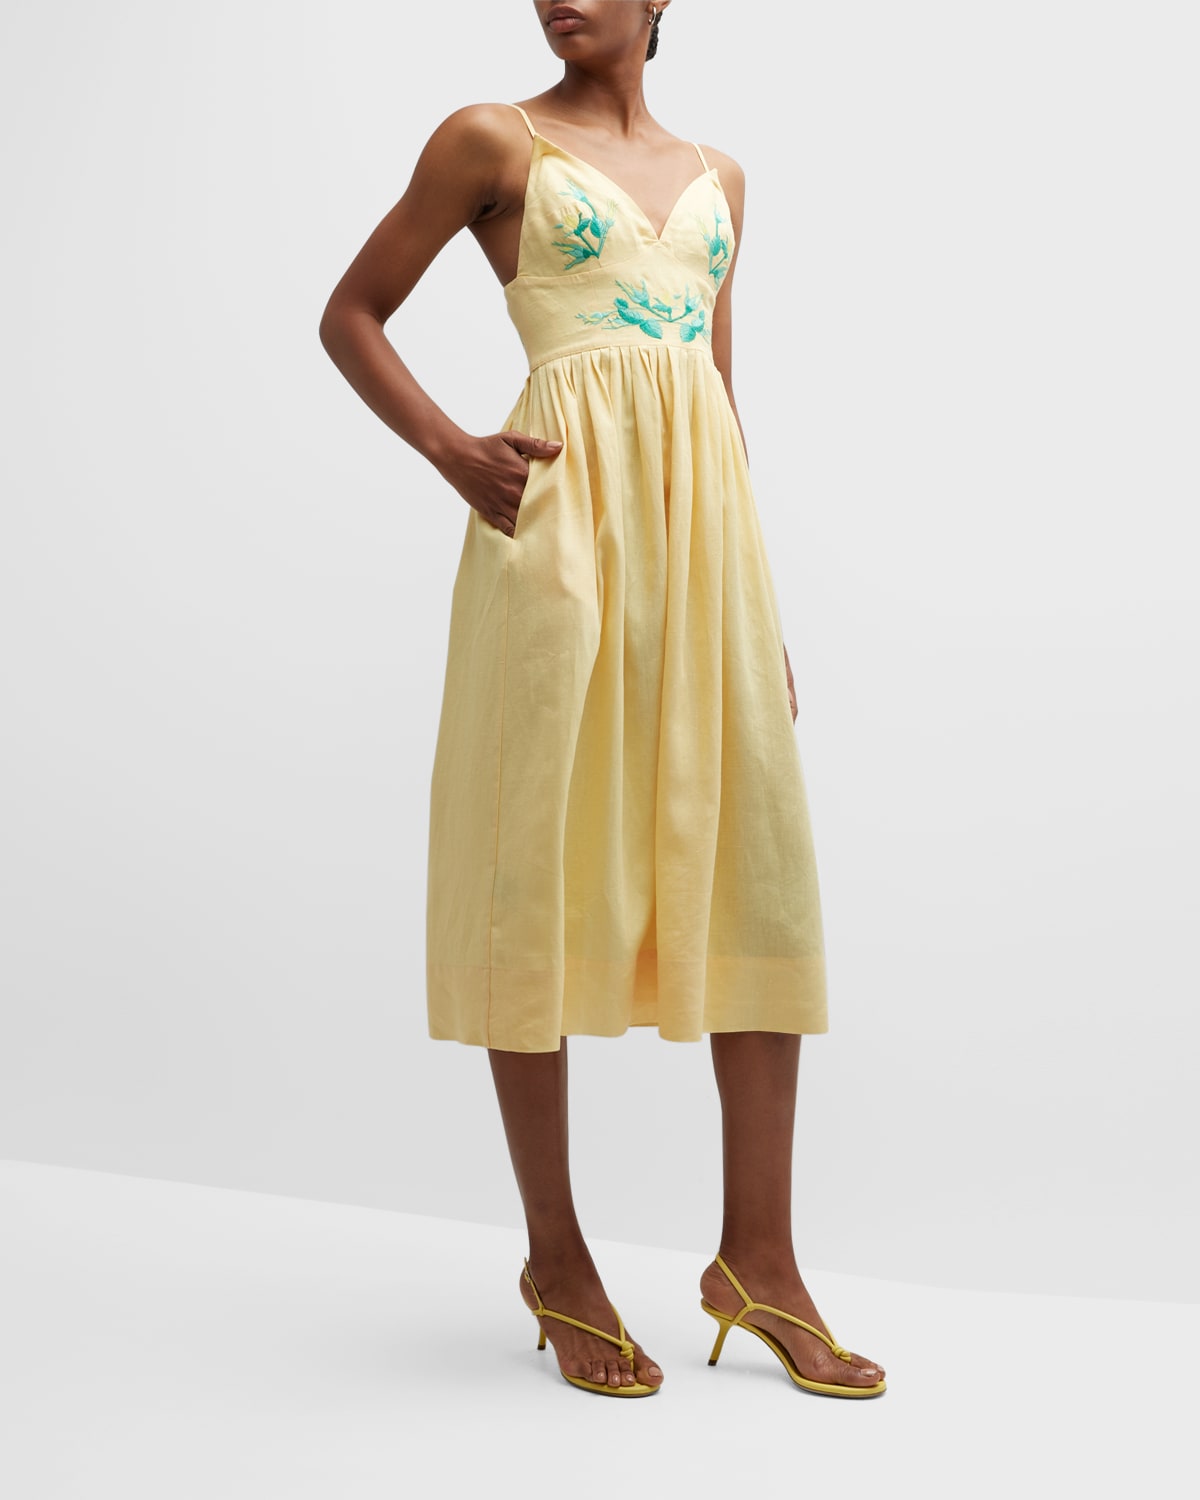 FANM MON Emilie Pleated Linen Midi Dress with Embroidery